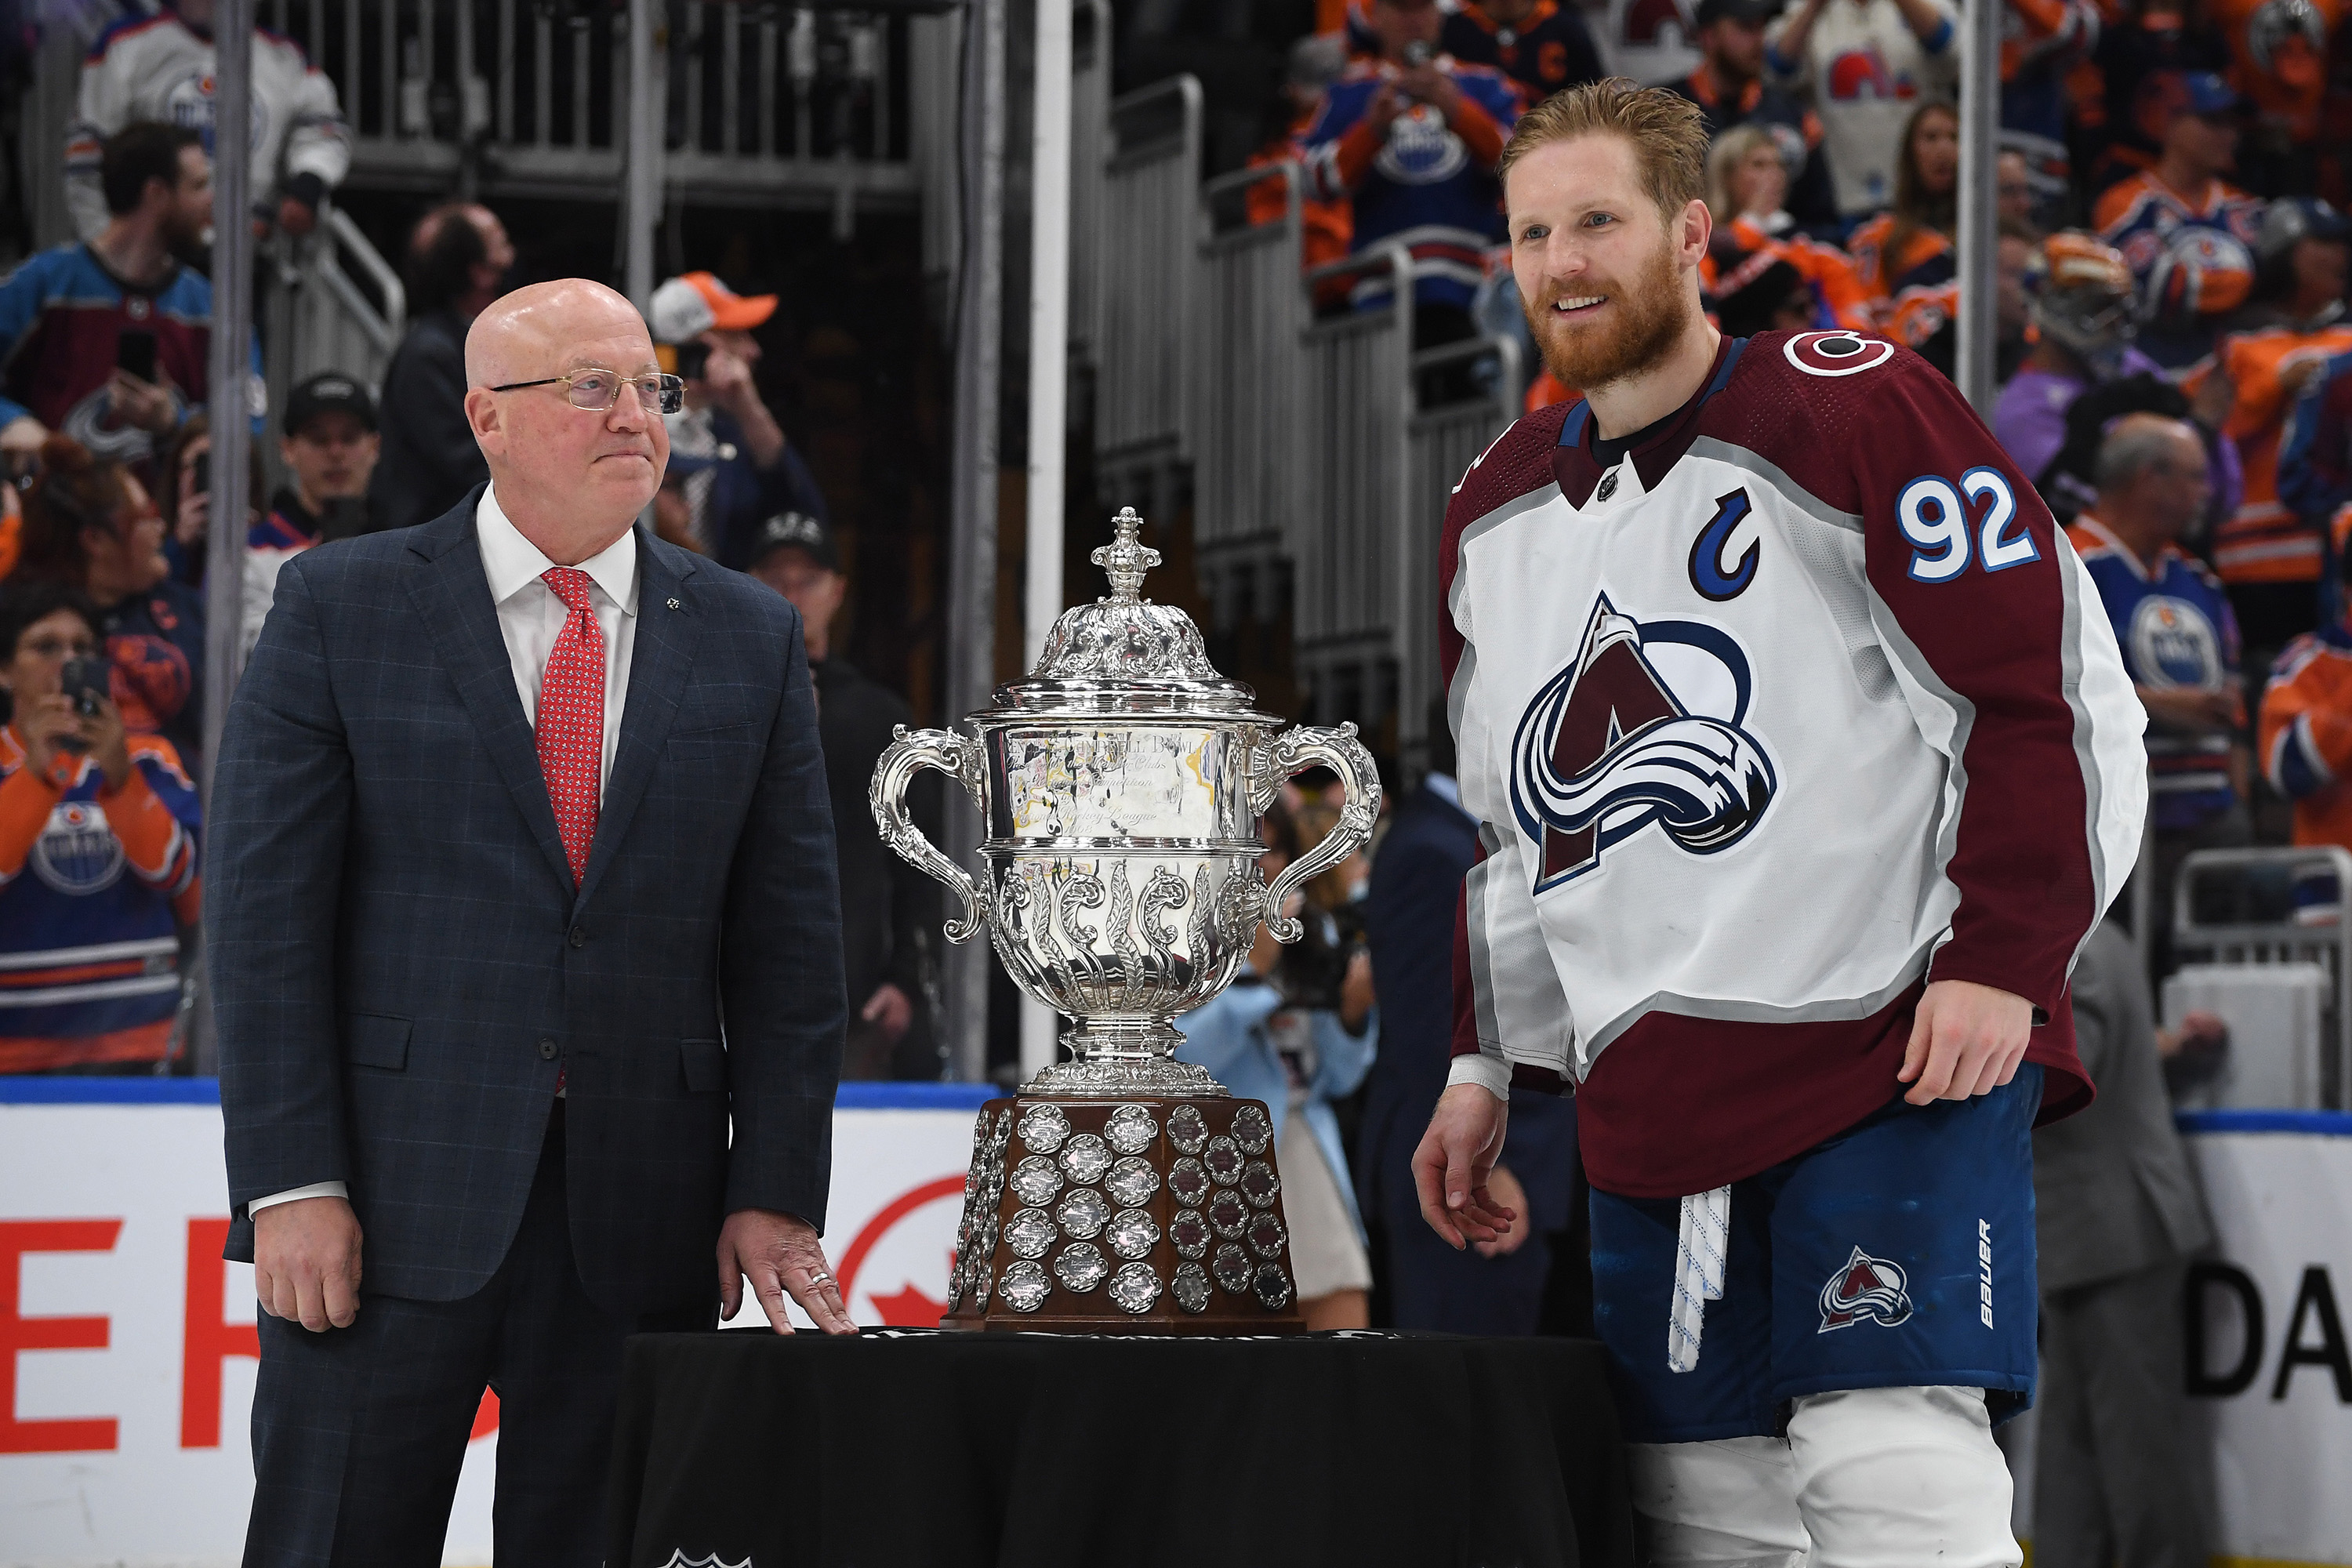 Gabriel Landeskog #92 of the Colorado Avalanche poses for a photo with Deputy Commissioner Bill Daly before the presentation of the Clarence S. Campbell Bowl after defeating the Edmonton Oilers 6-5 in overtime in Game Four of the Western Conference Final of the 2022 Stanley Cup Playoffs at Rogers Place on June 6, 2022 in Edmonton, Alberta.